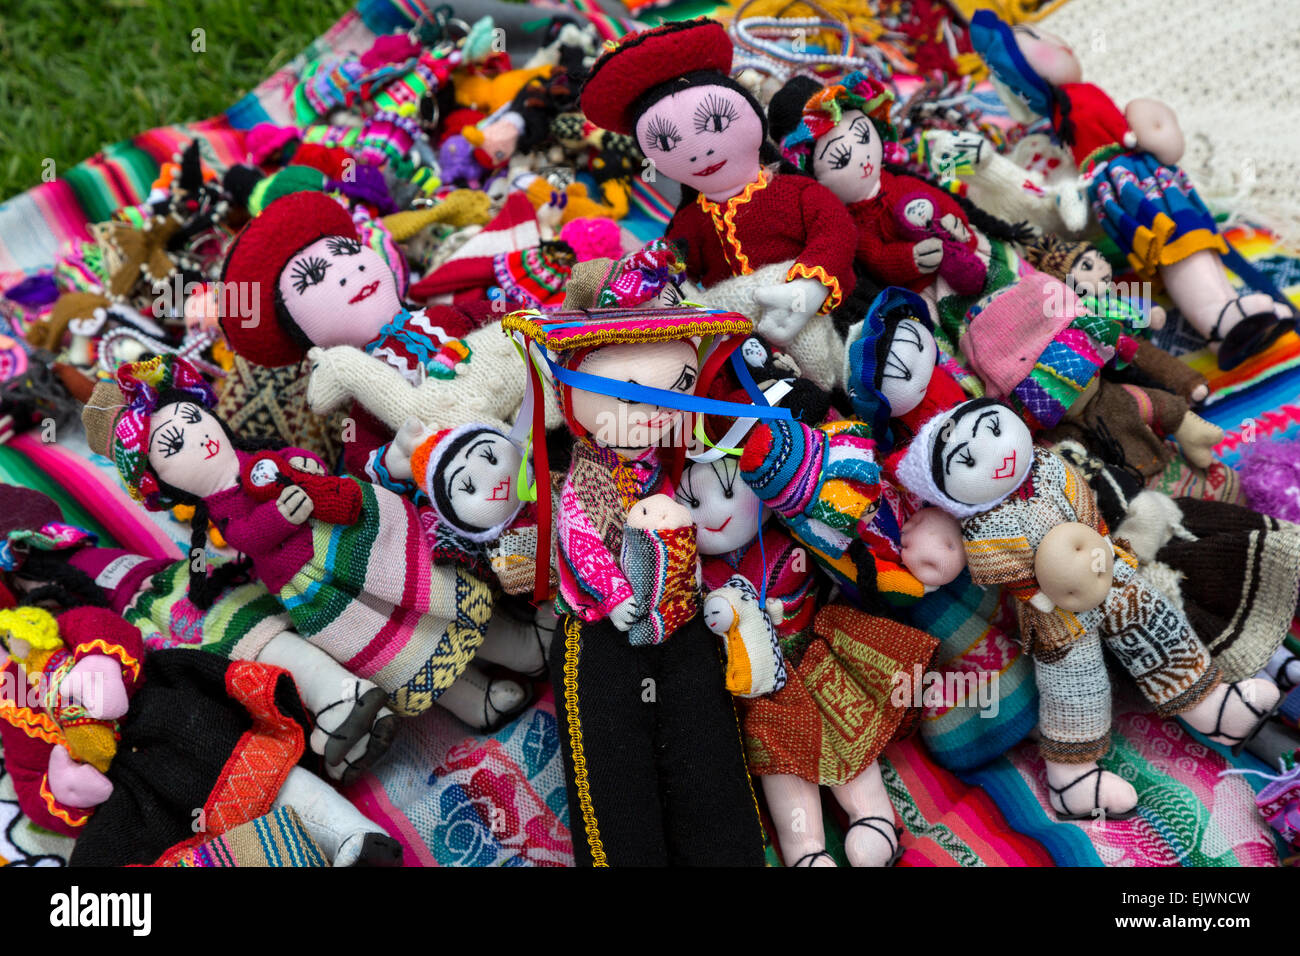 Peru, Urubamba Valley, Quechua Village of Misminay.  Dolls Made by Villagers for Sale to Tourists. Stock Photo